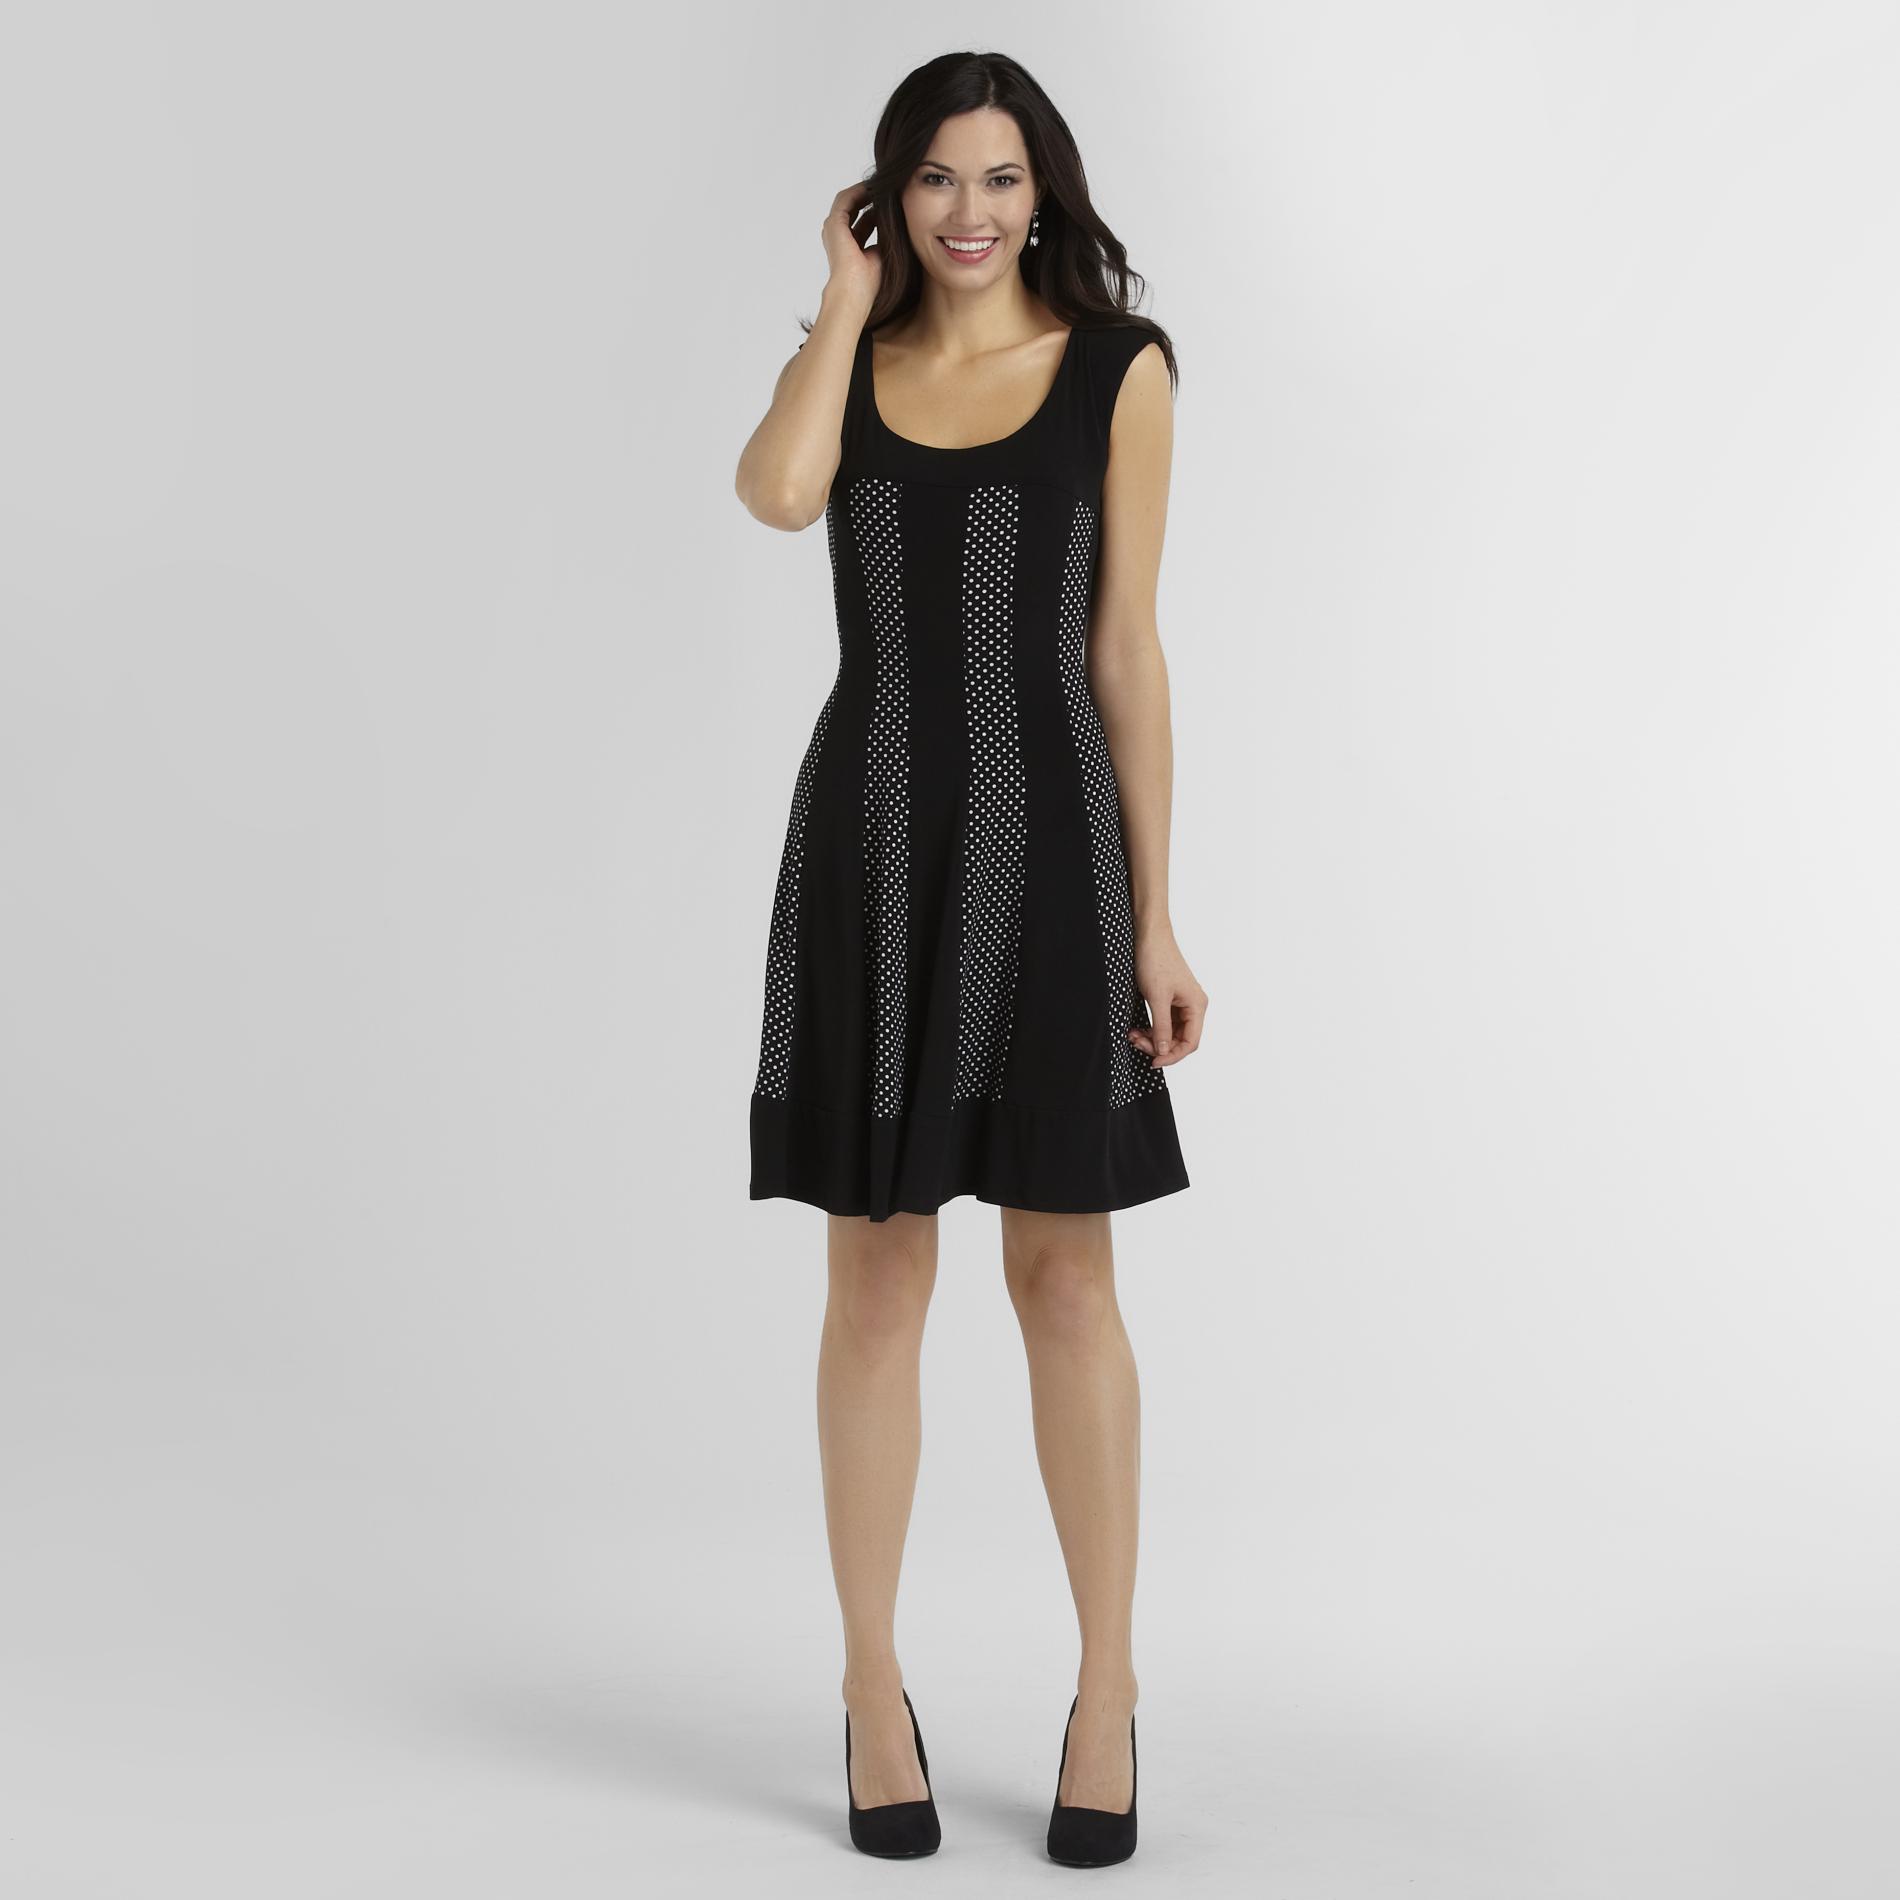 Connected Apparel Women's Sleeveless Party Dress Black 6